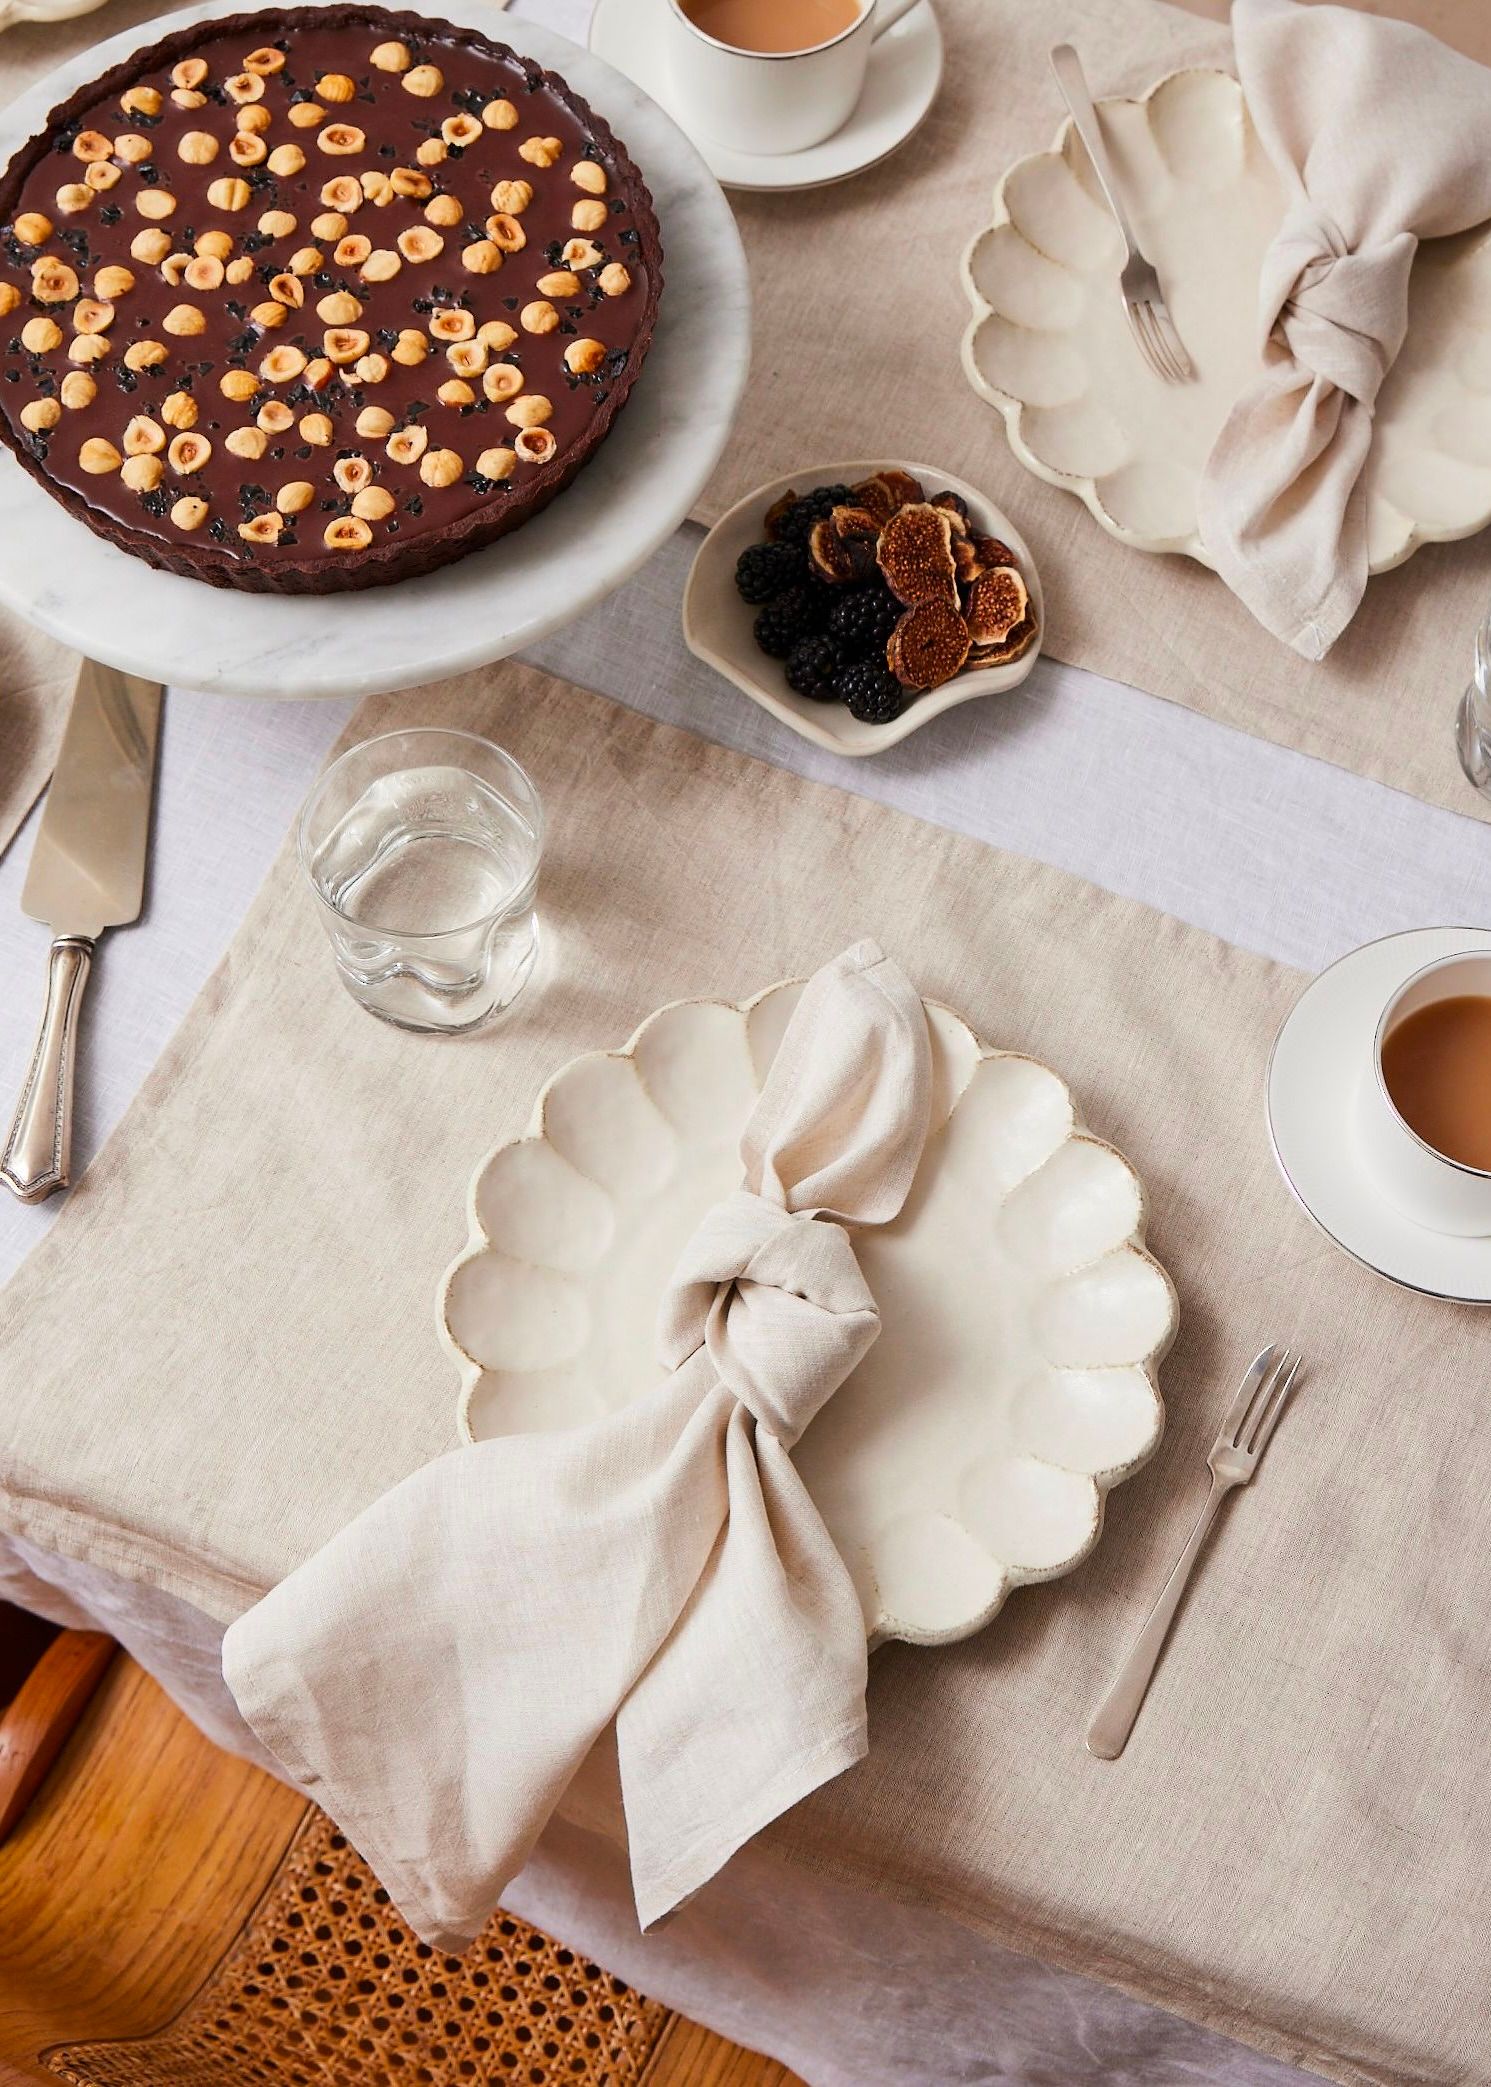 8 Easy Ways to Fold a Napkin for Your Next Dinner Party – Bed Threads